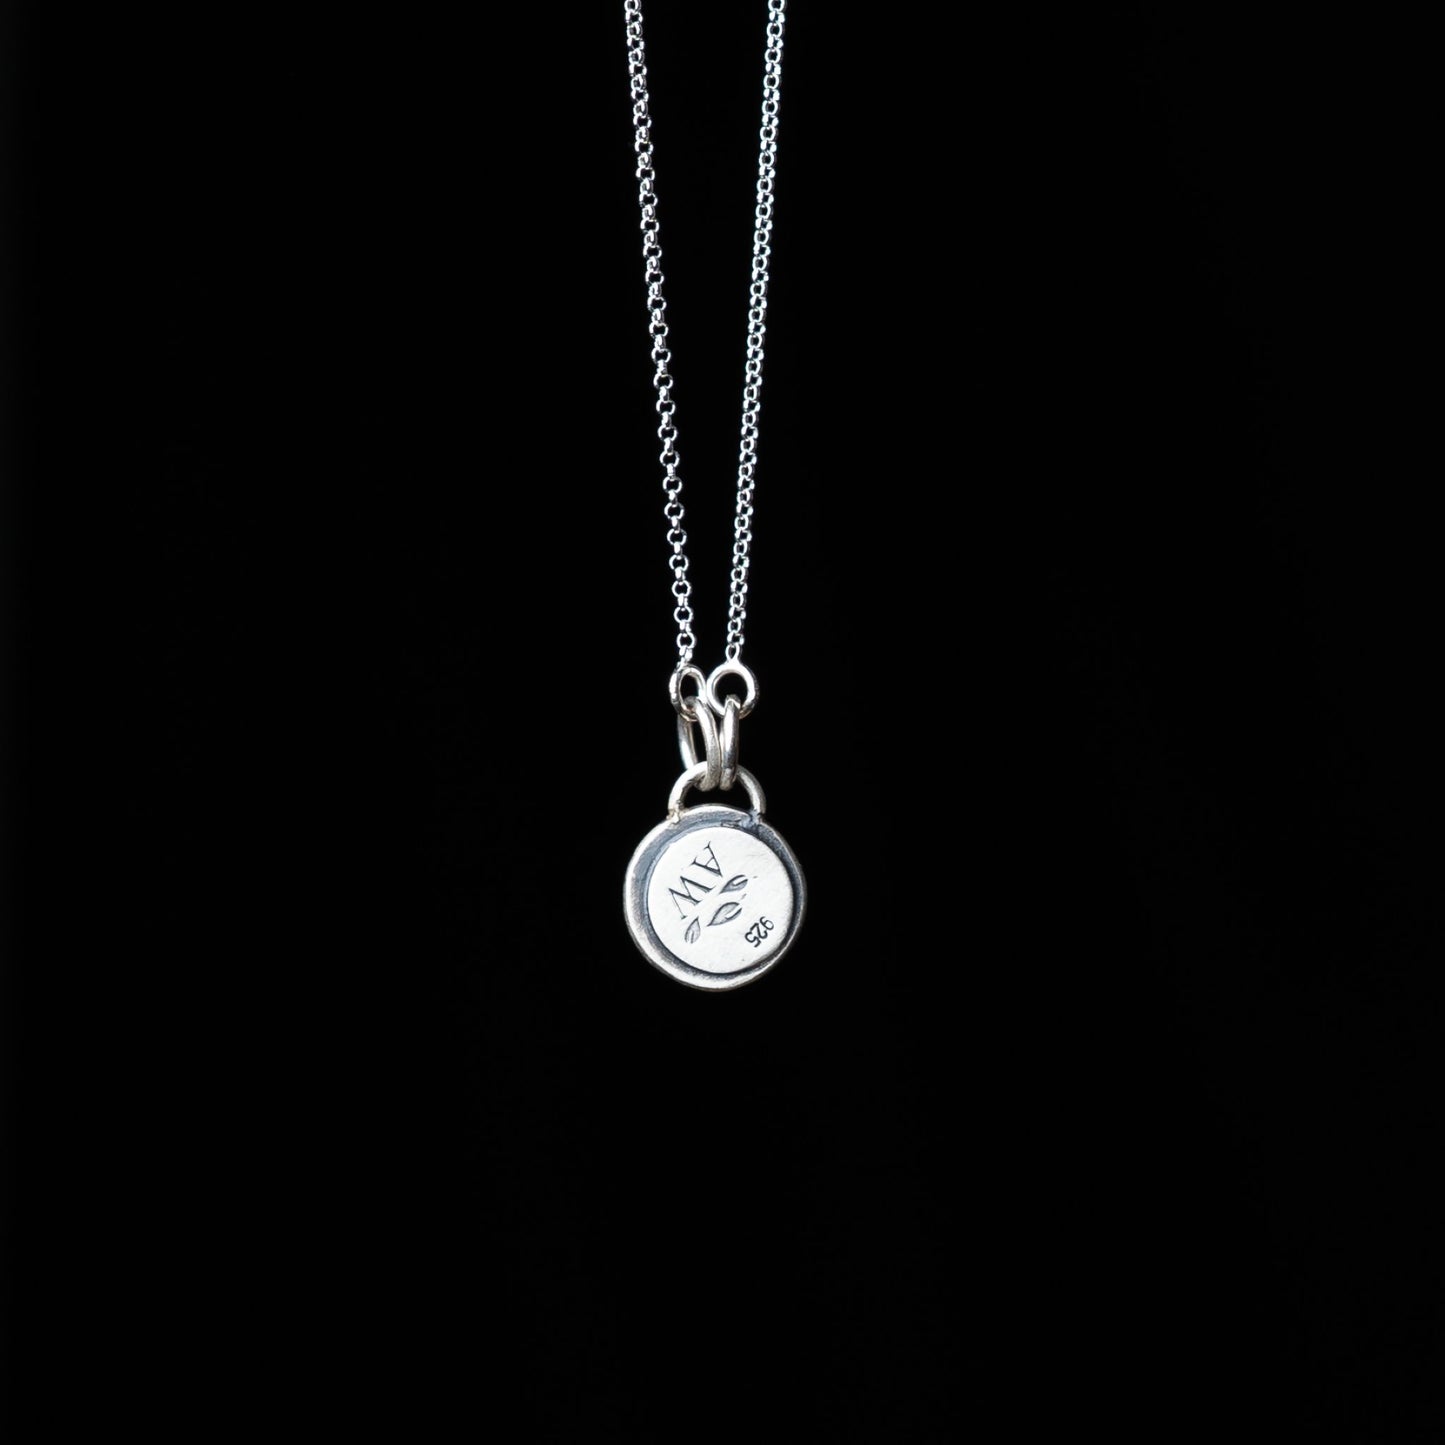 Silver & Copper Ying Yang Necklace